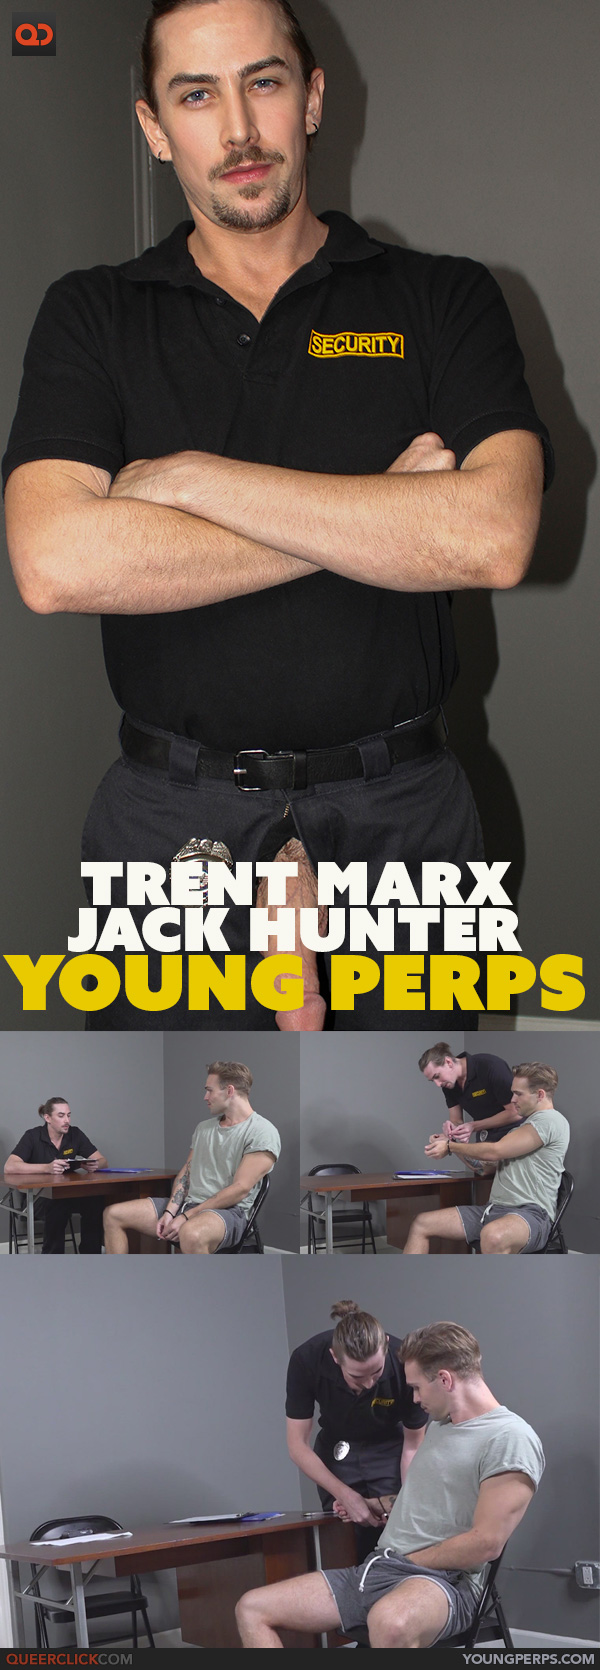 Say Uncle | Young Perps: Trent Marx and Jack Hunter